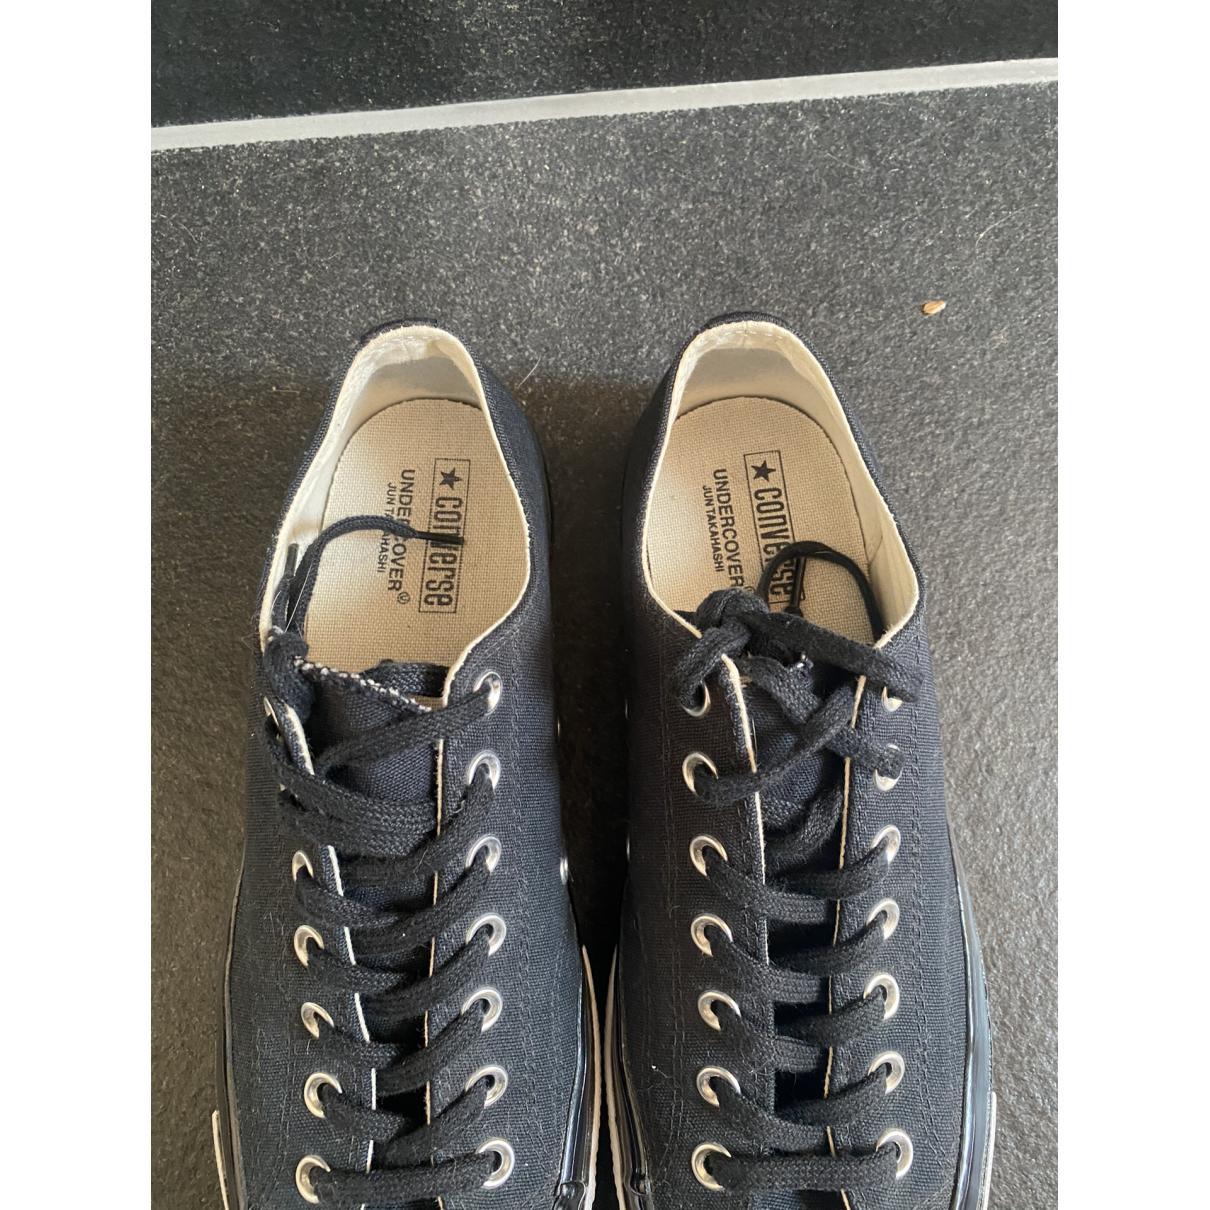 CONVERSE X UNDERCOVER - Lace ups - 2